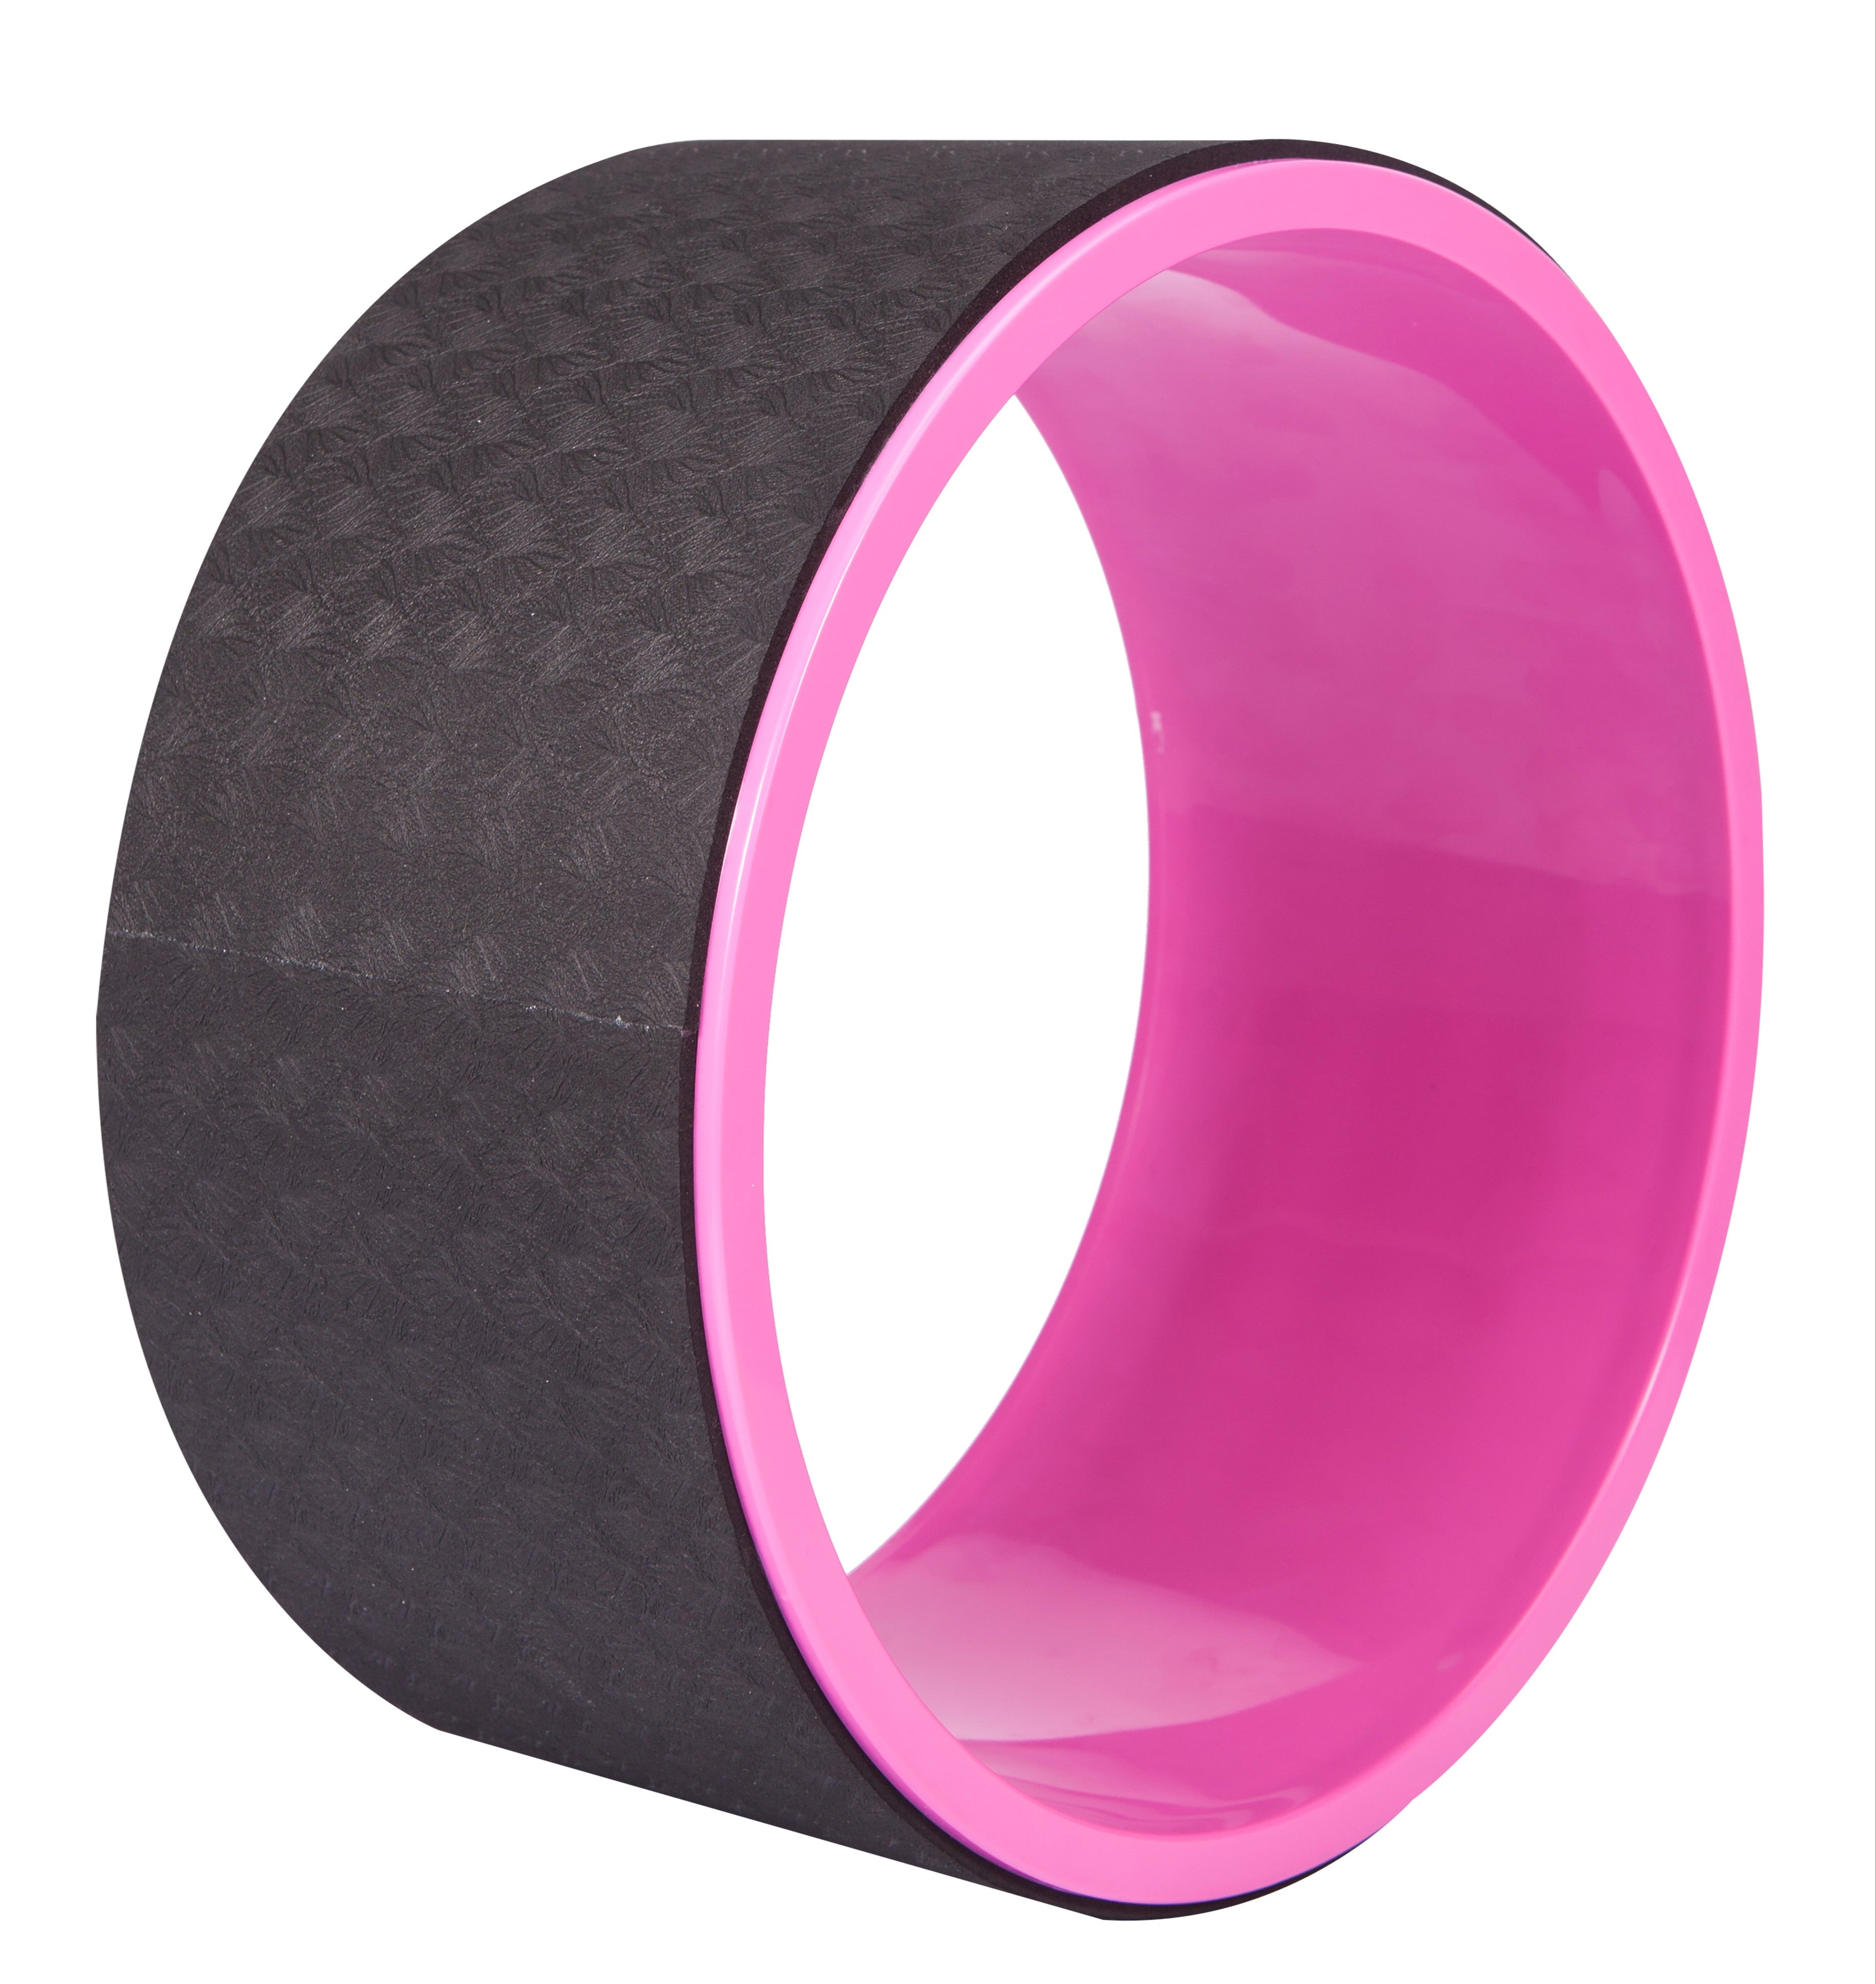 Live Up Deluxe Yoga Wheel - Pink